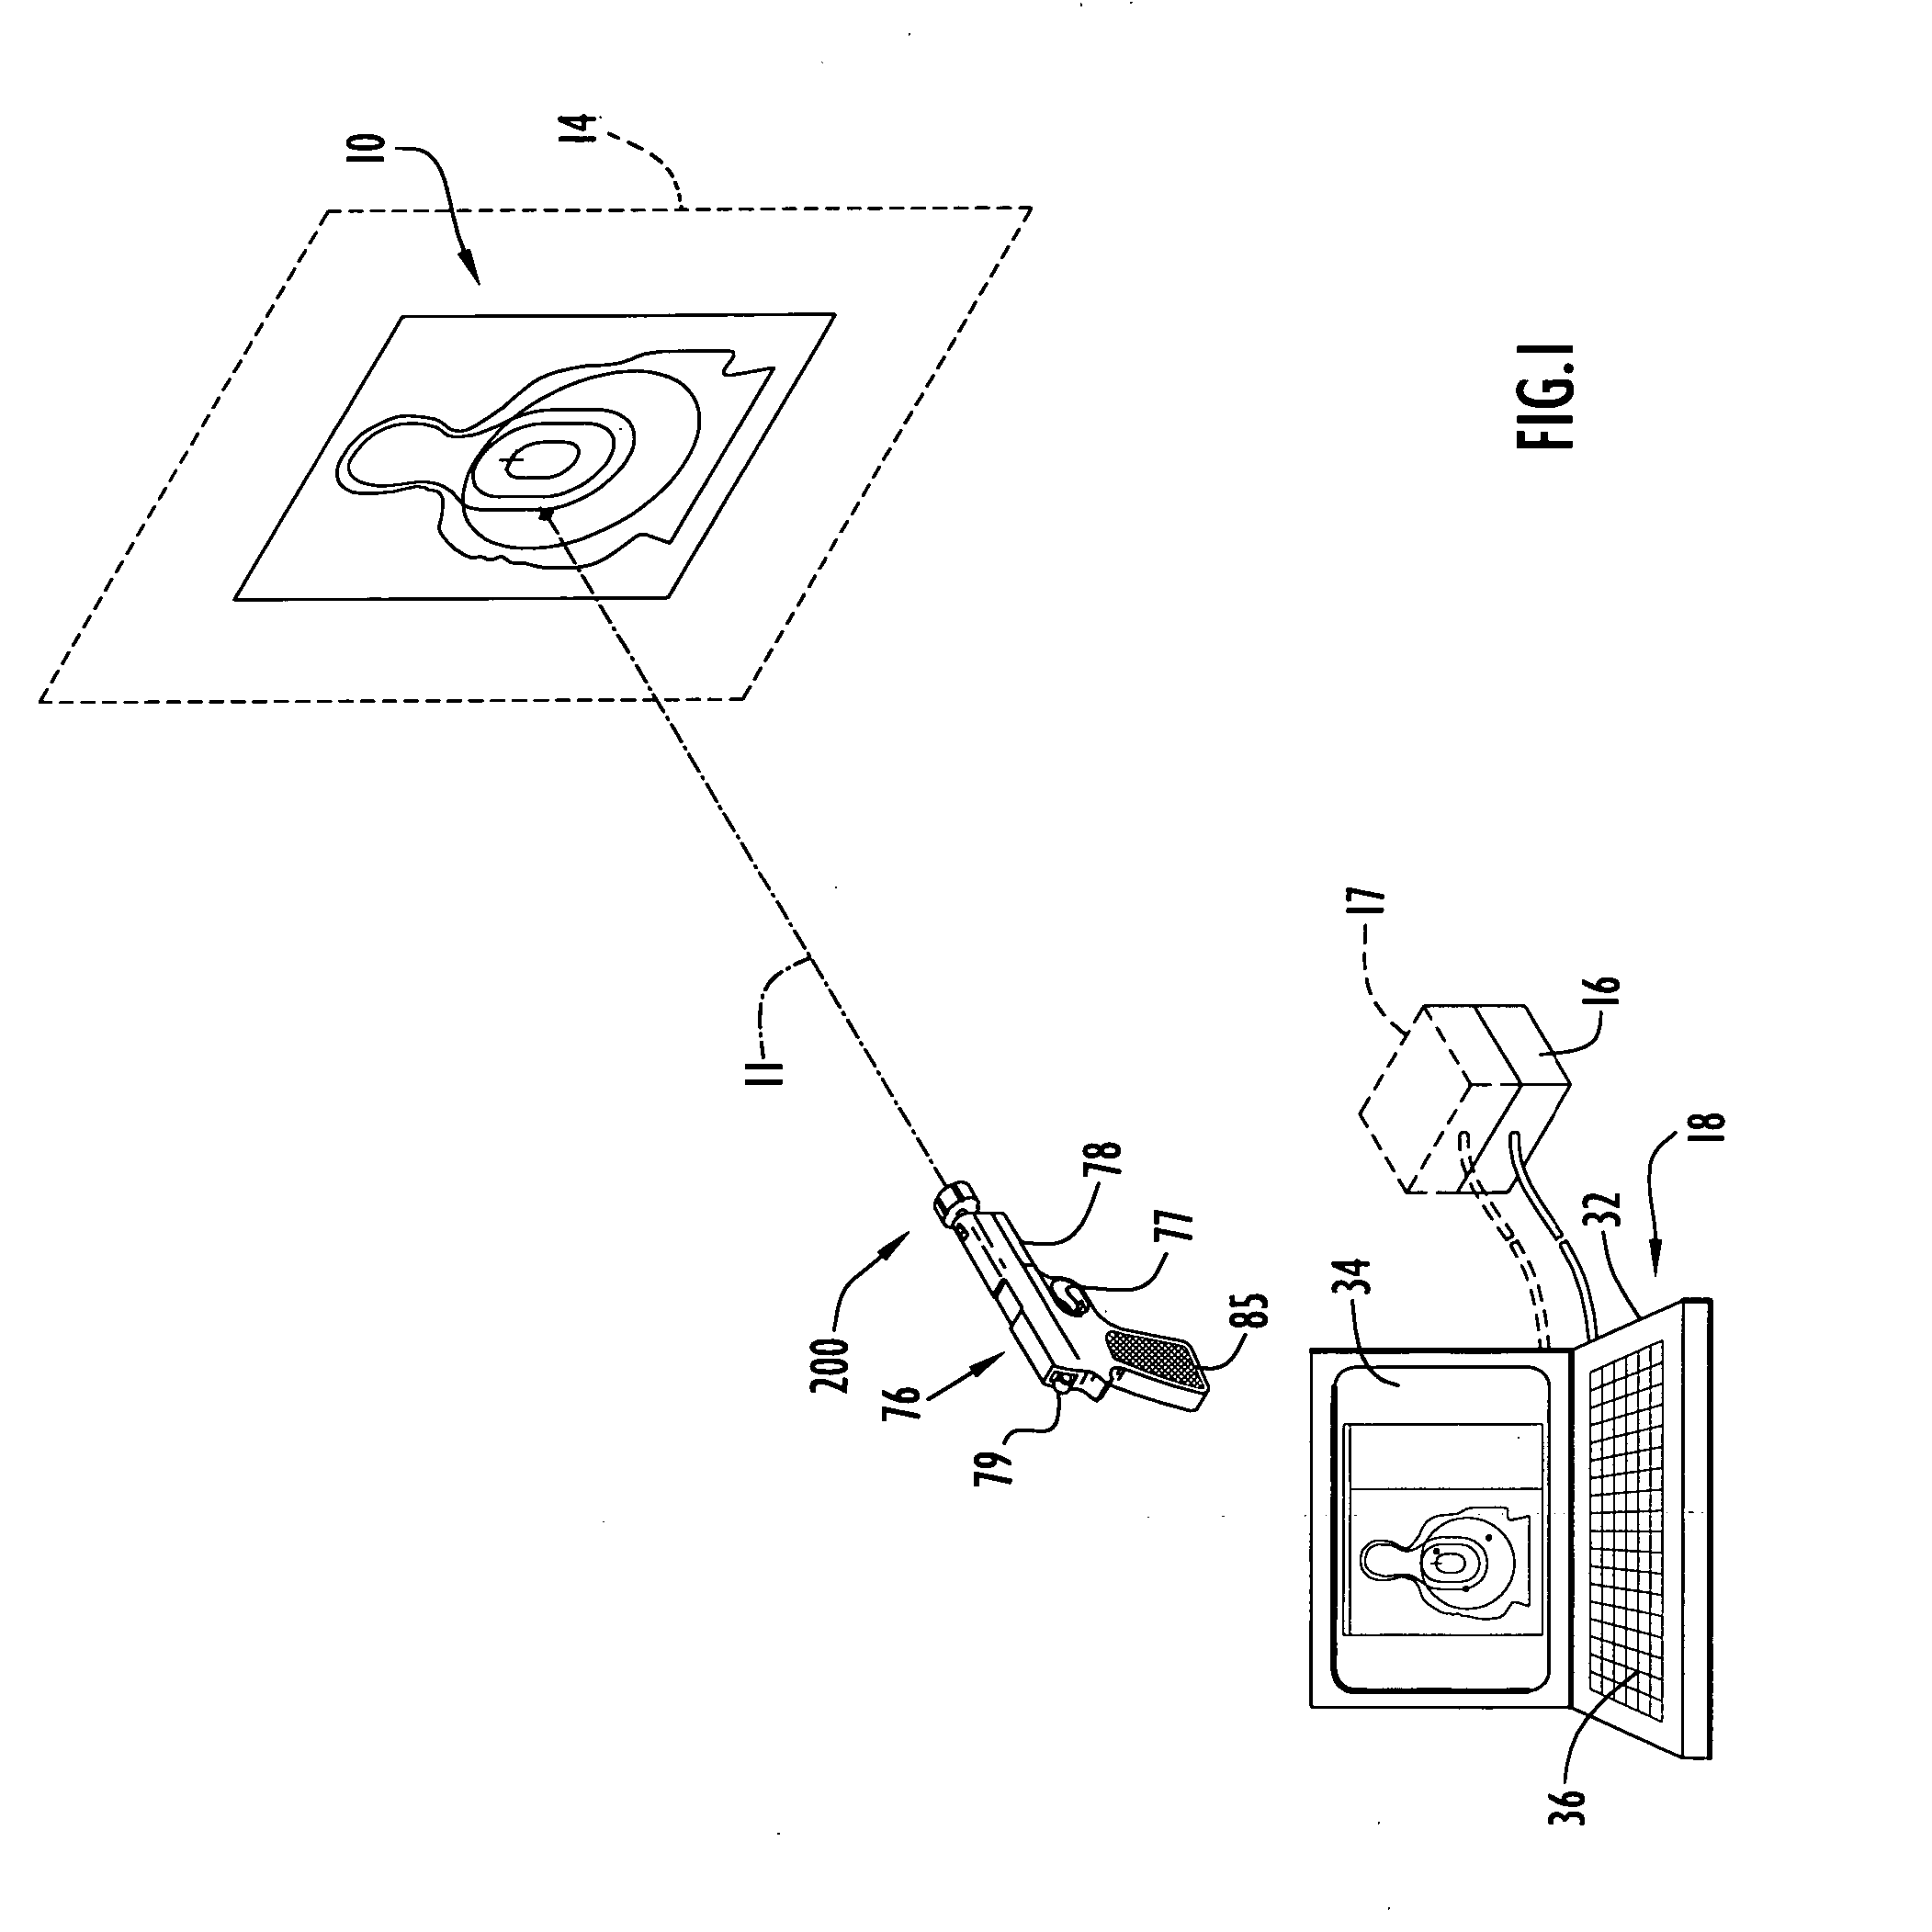 Sensing device for firearm laser training system and method of simulating firearm operation with various training scenarios